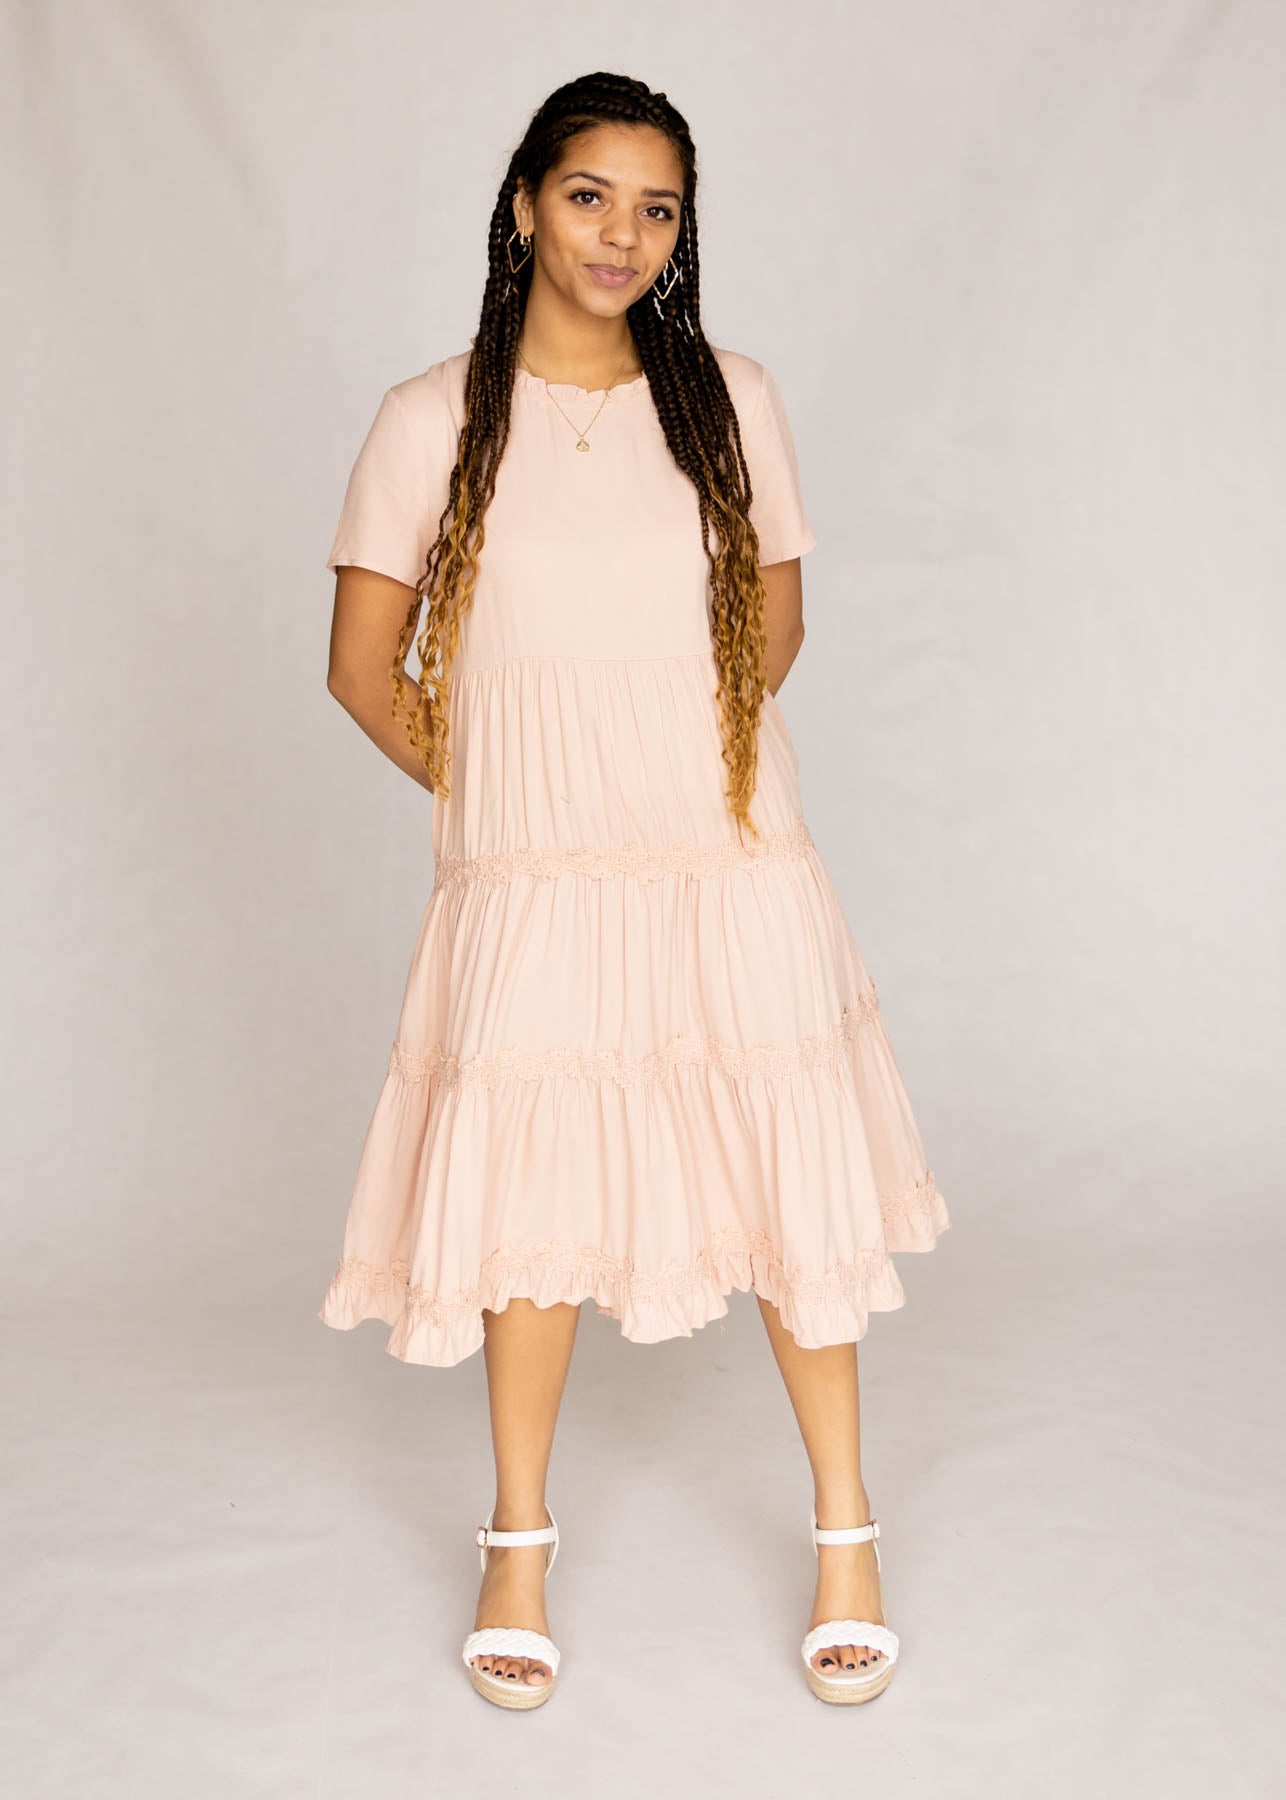 Short sleeve blush tiered dress with lace trim